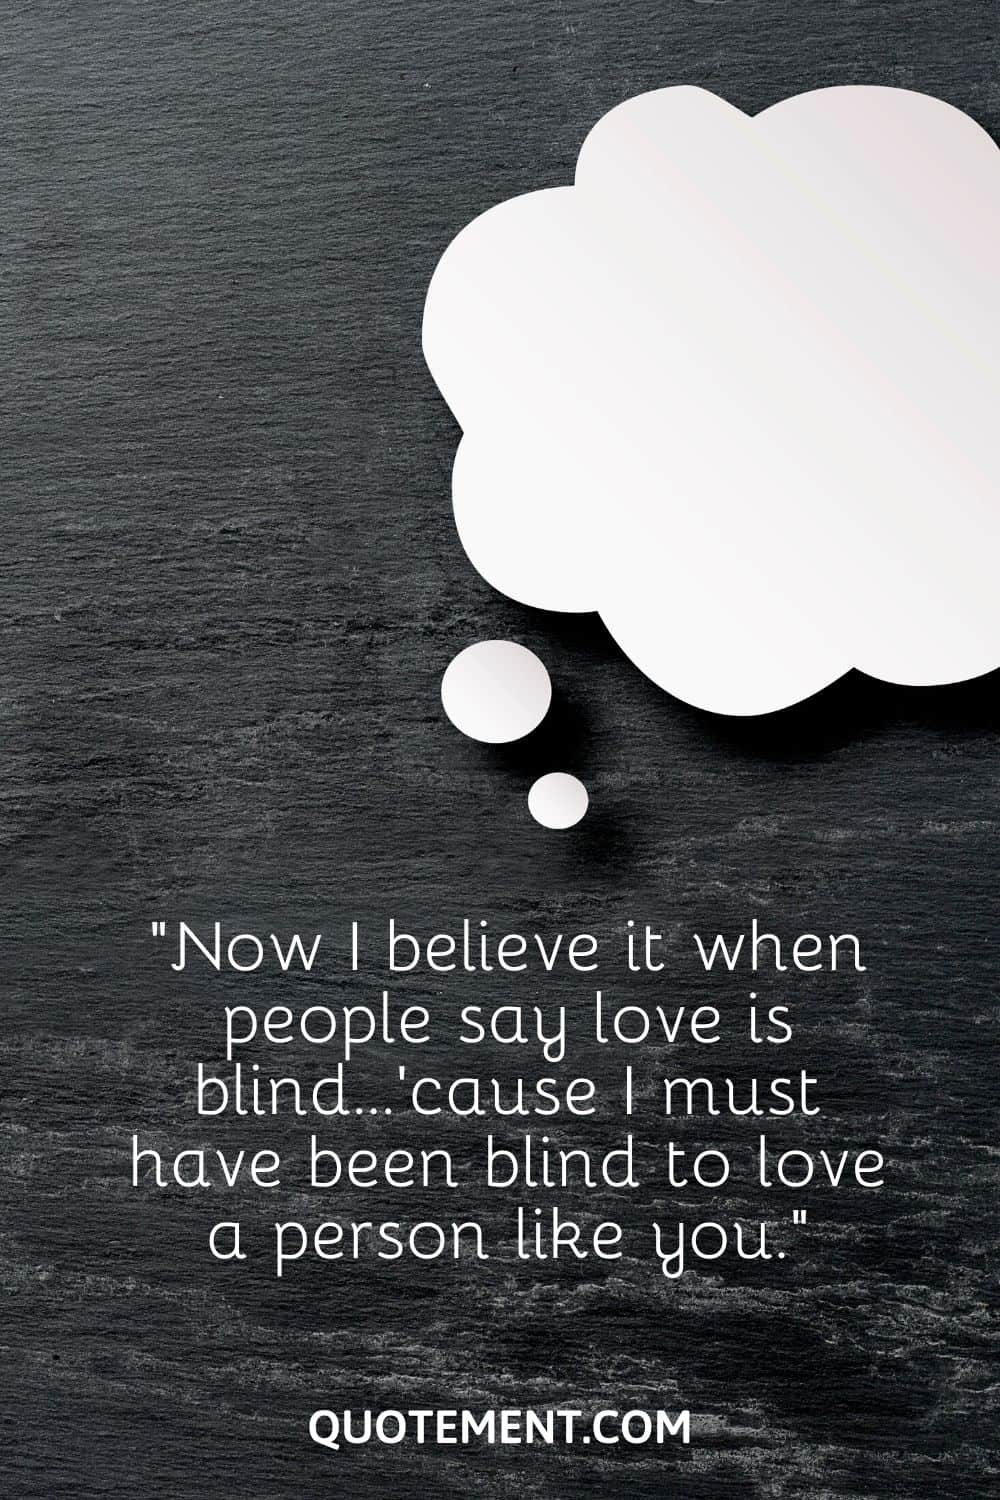 “Now I believe it when people say love is blind…’cause I must have been blind to love a person like you.”